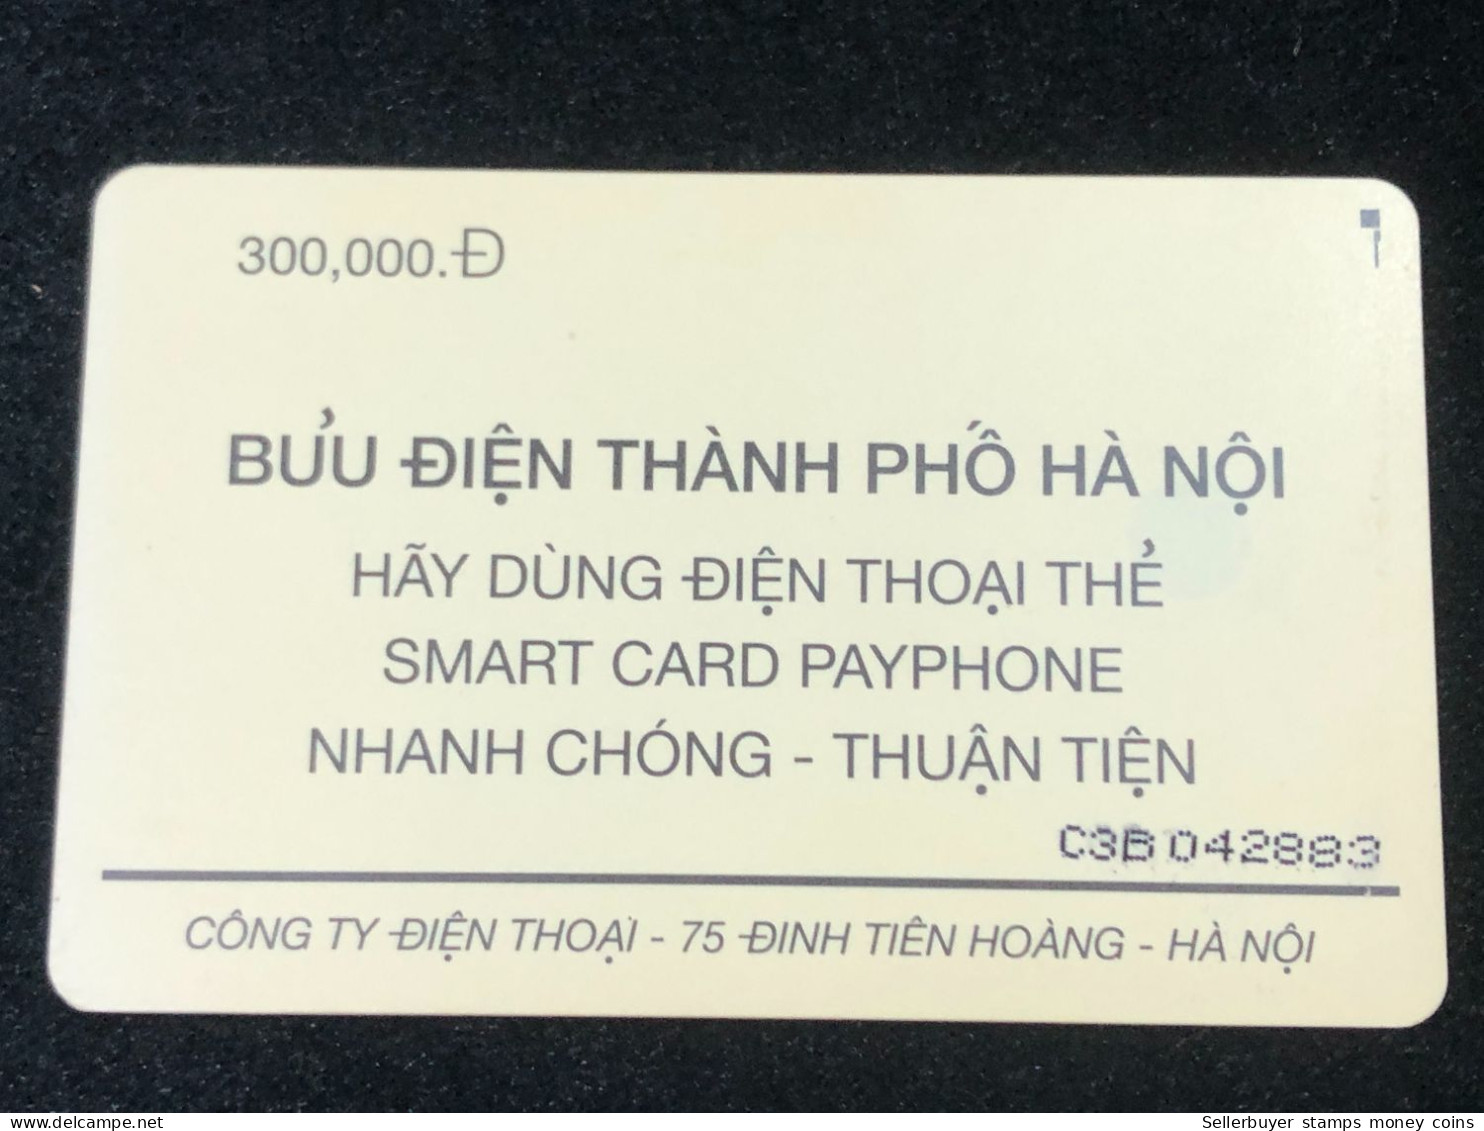 Vietnam This Is A Vietnamese Cardphone Card From 2001 And 2005(chua Mot Cot- 40 000dong Not Released Rare)-1pcs - Viêt-Nam